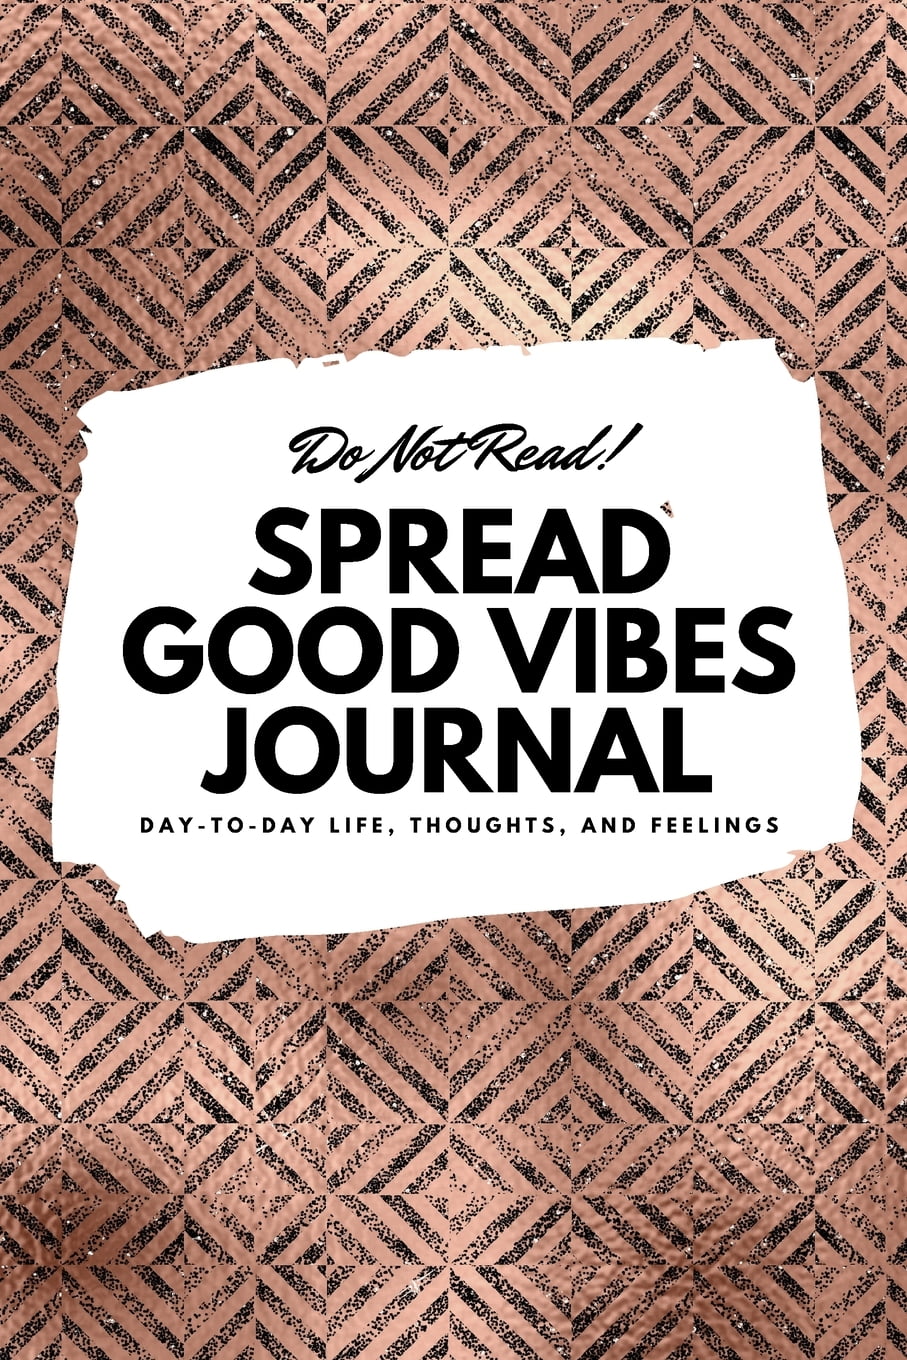 6x9-blank-journal-do-not-read-spread-good-vibes-journal-small-blank